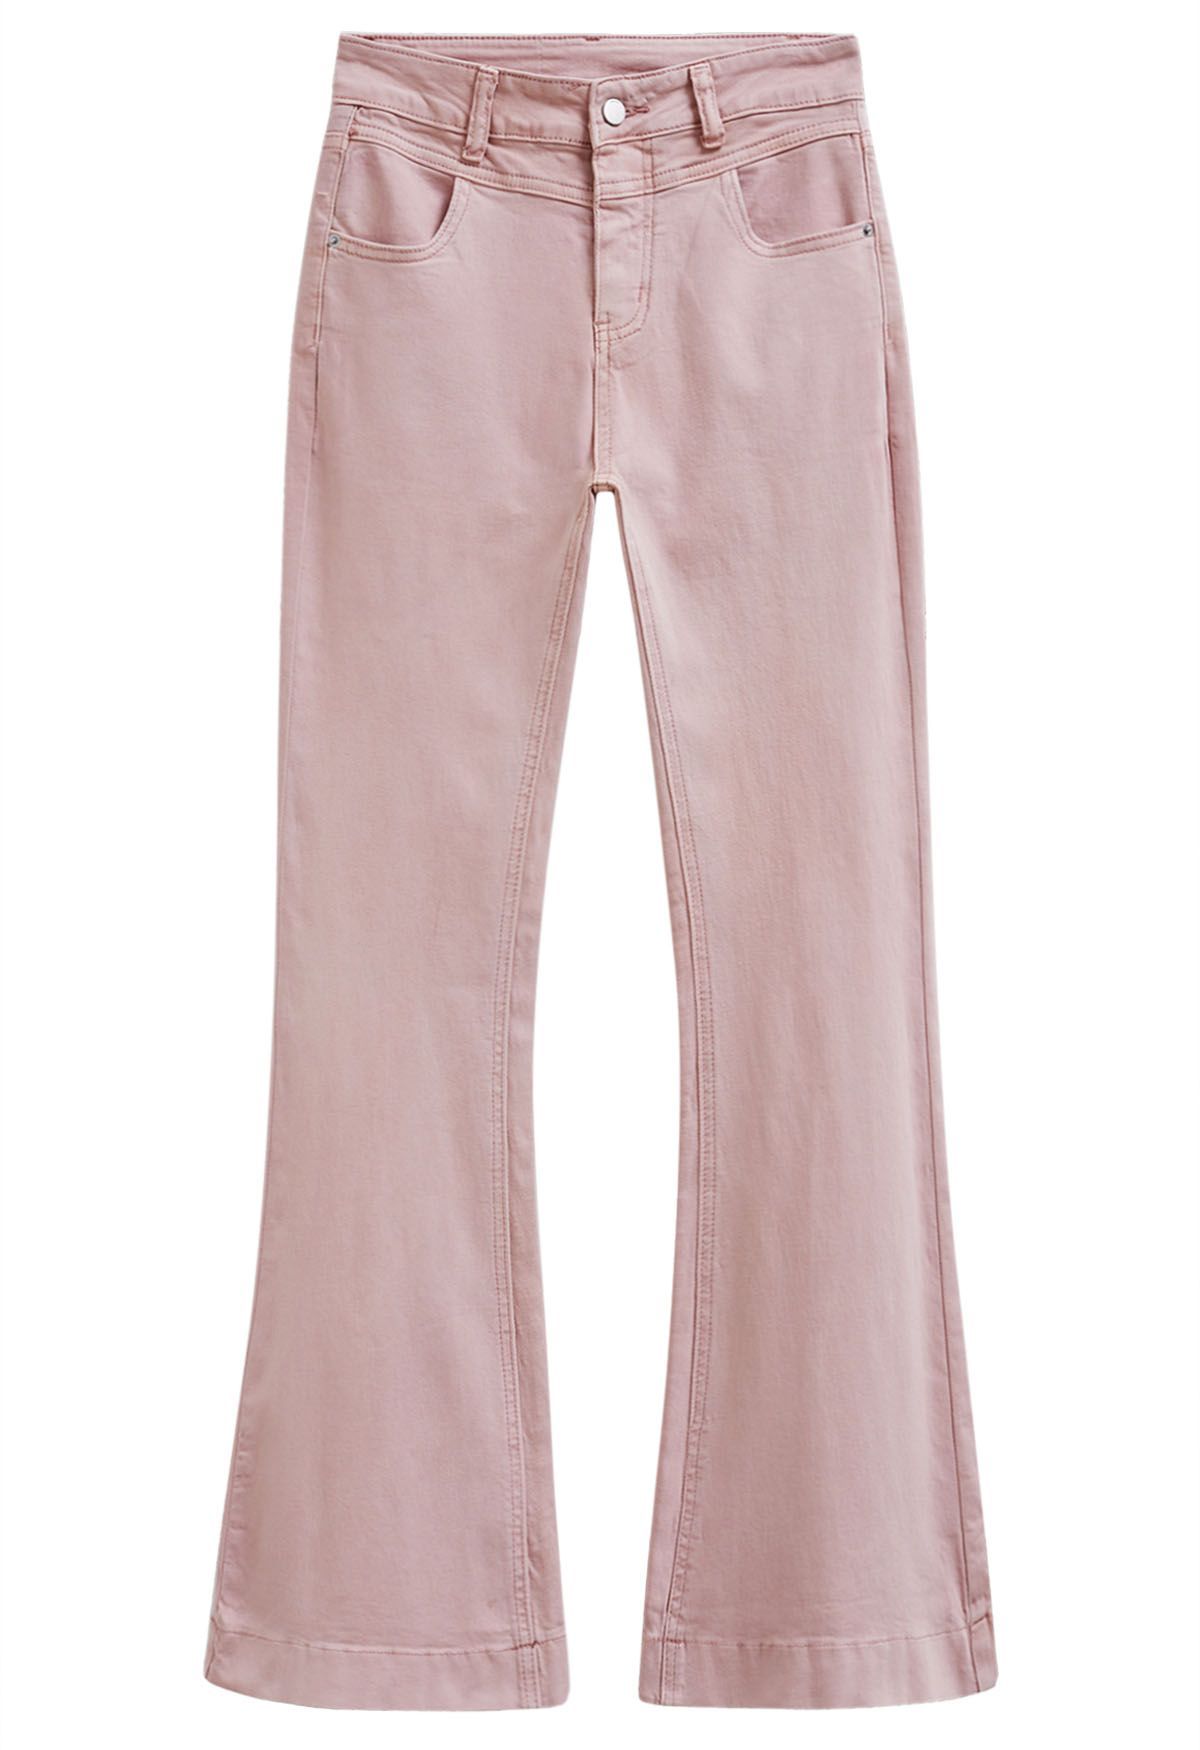 On-Trend High Waist Flare Leg Jeans in Pink | Chicwish